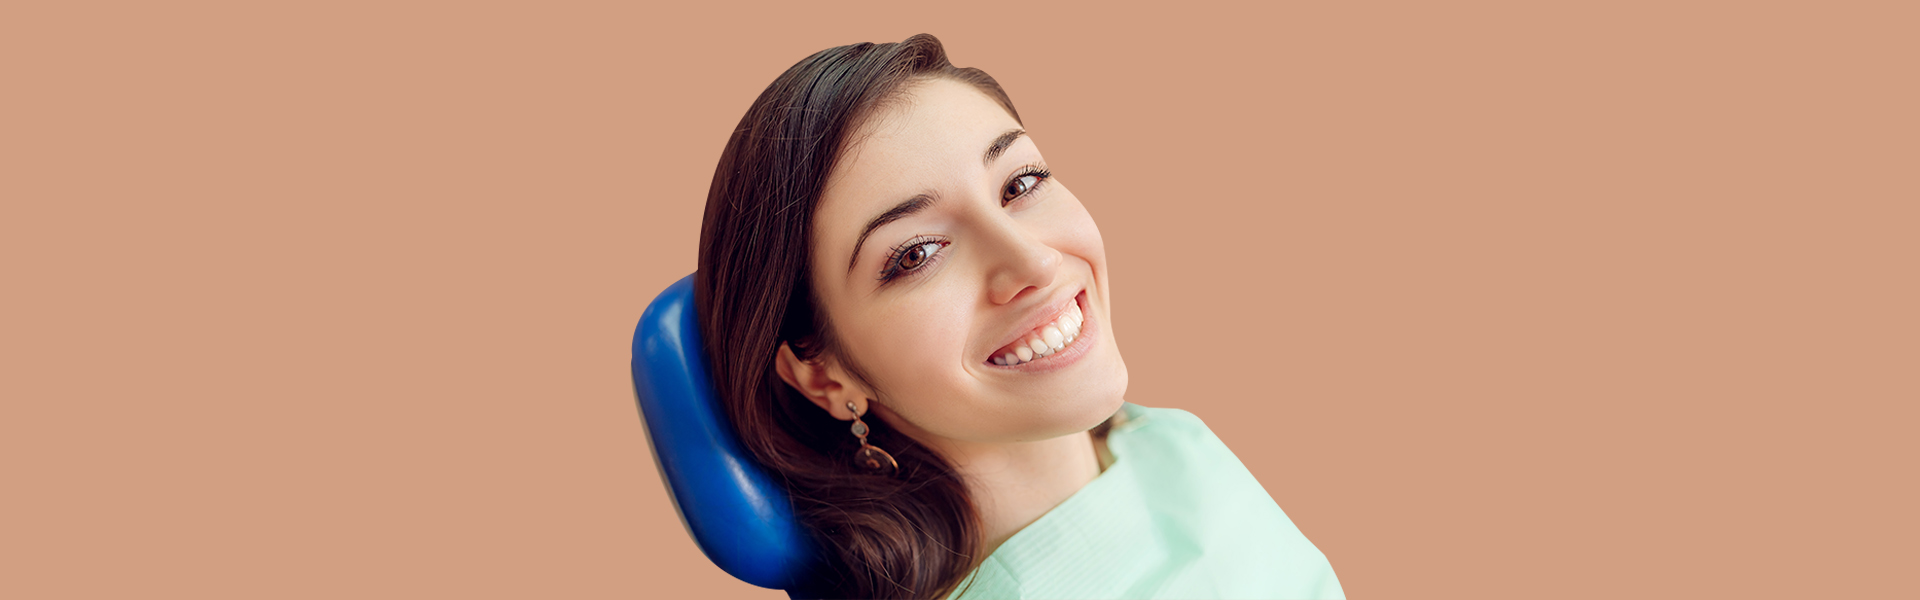 10 Things Most People Don’t Know About Preventive Dentistry